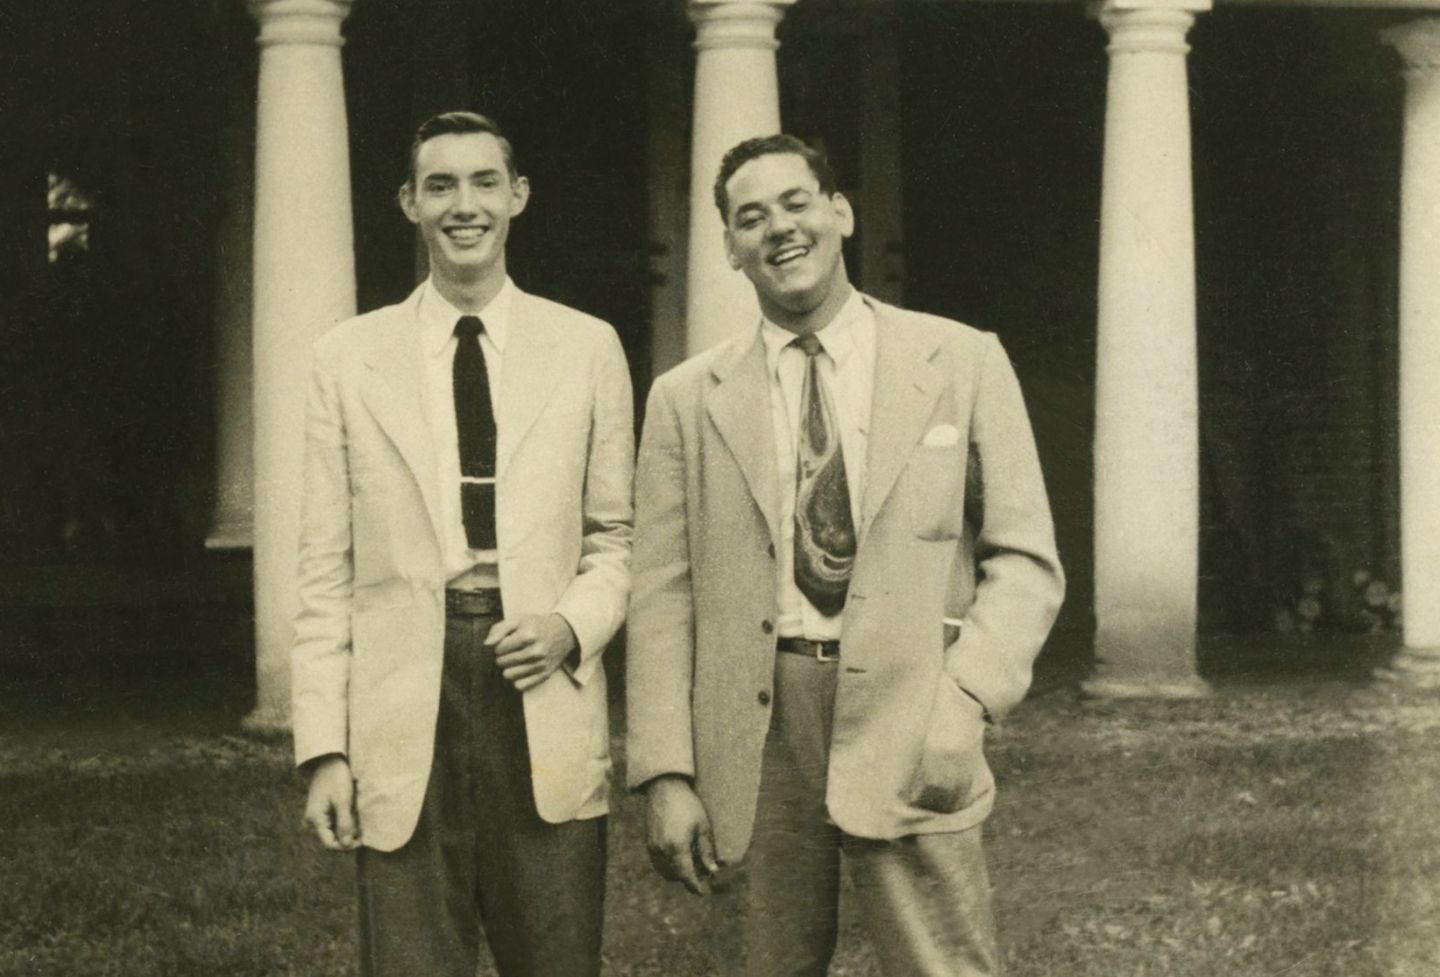 Gregory Swanson, right, on the University of Virginia Lawn